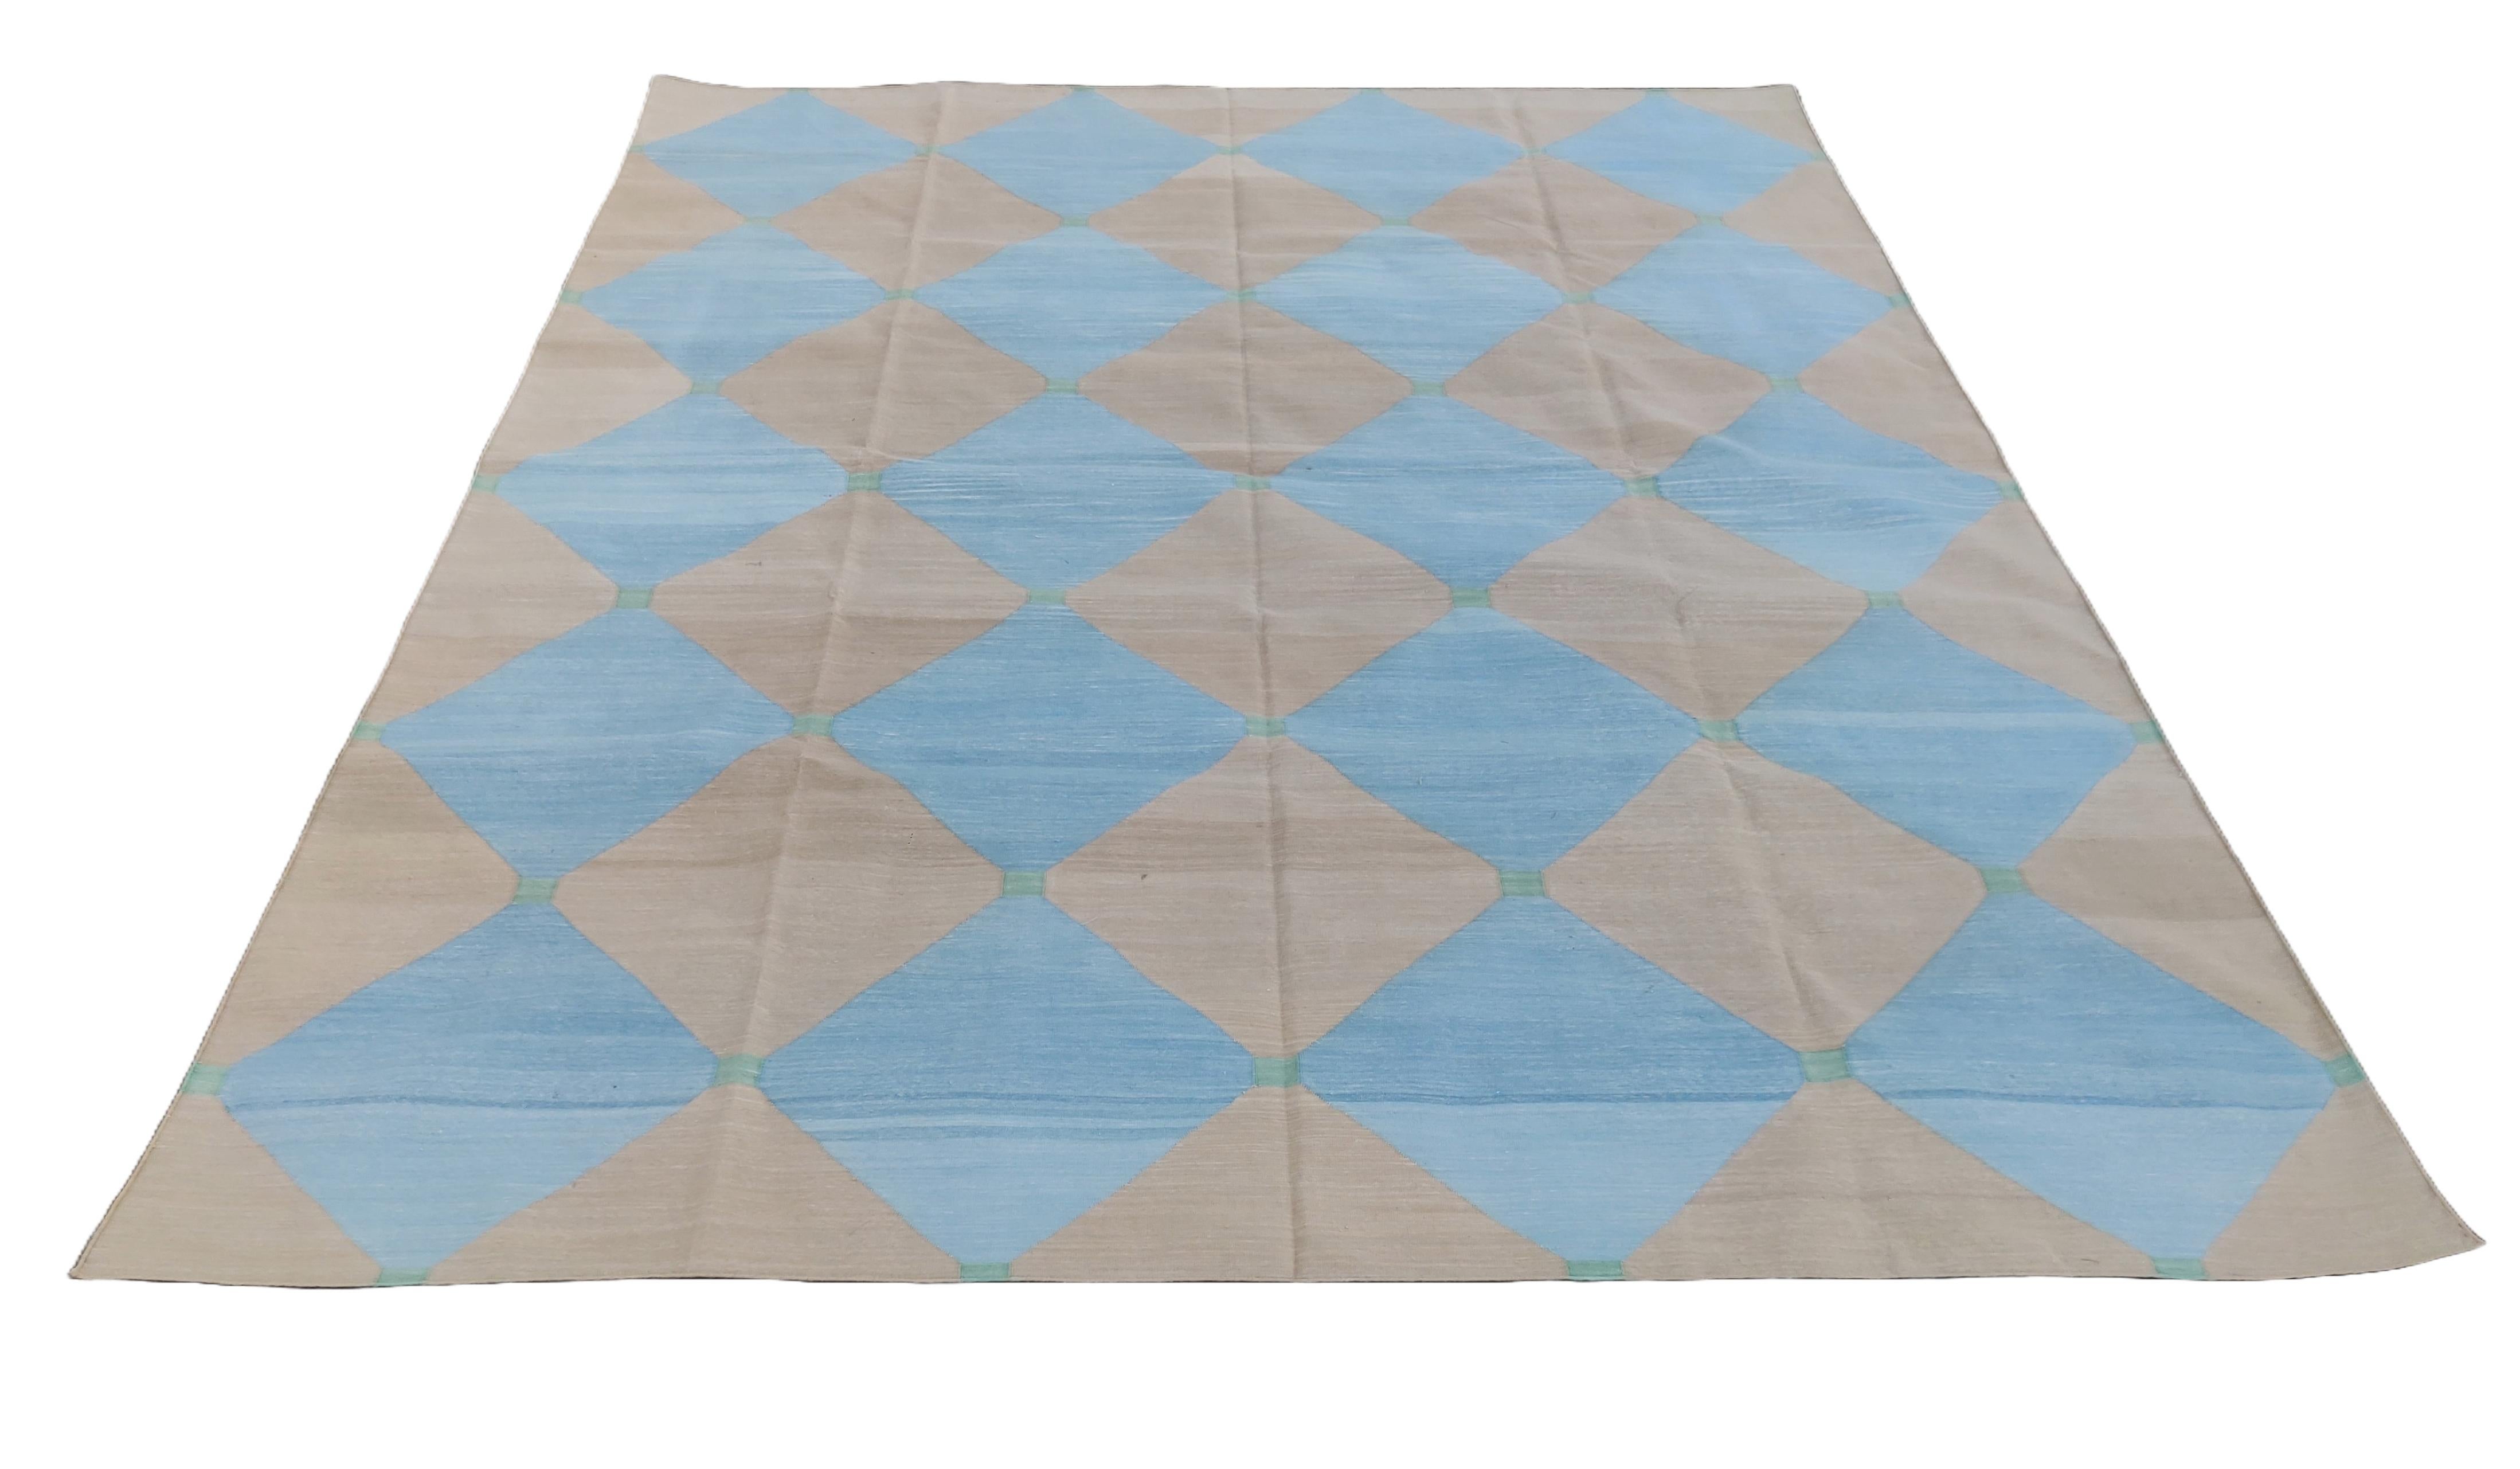 Hand-Woven Handmade Cotton Area Flat Weave Rug, 8x10 Beige And Blue Tile Patterned Dhurrie For Sale